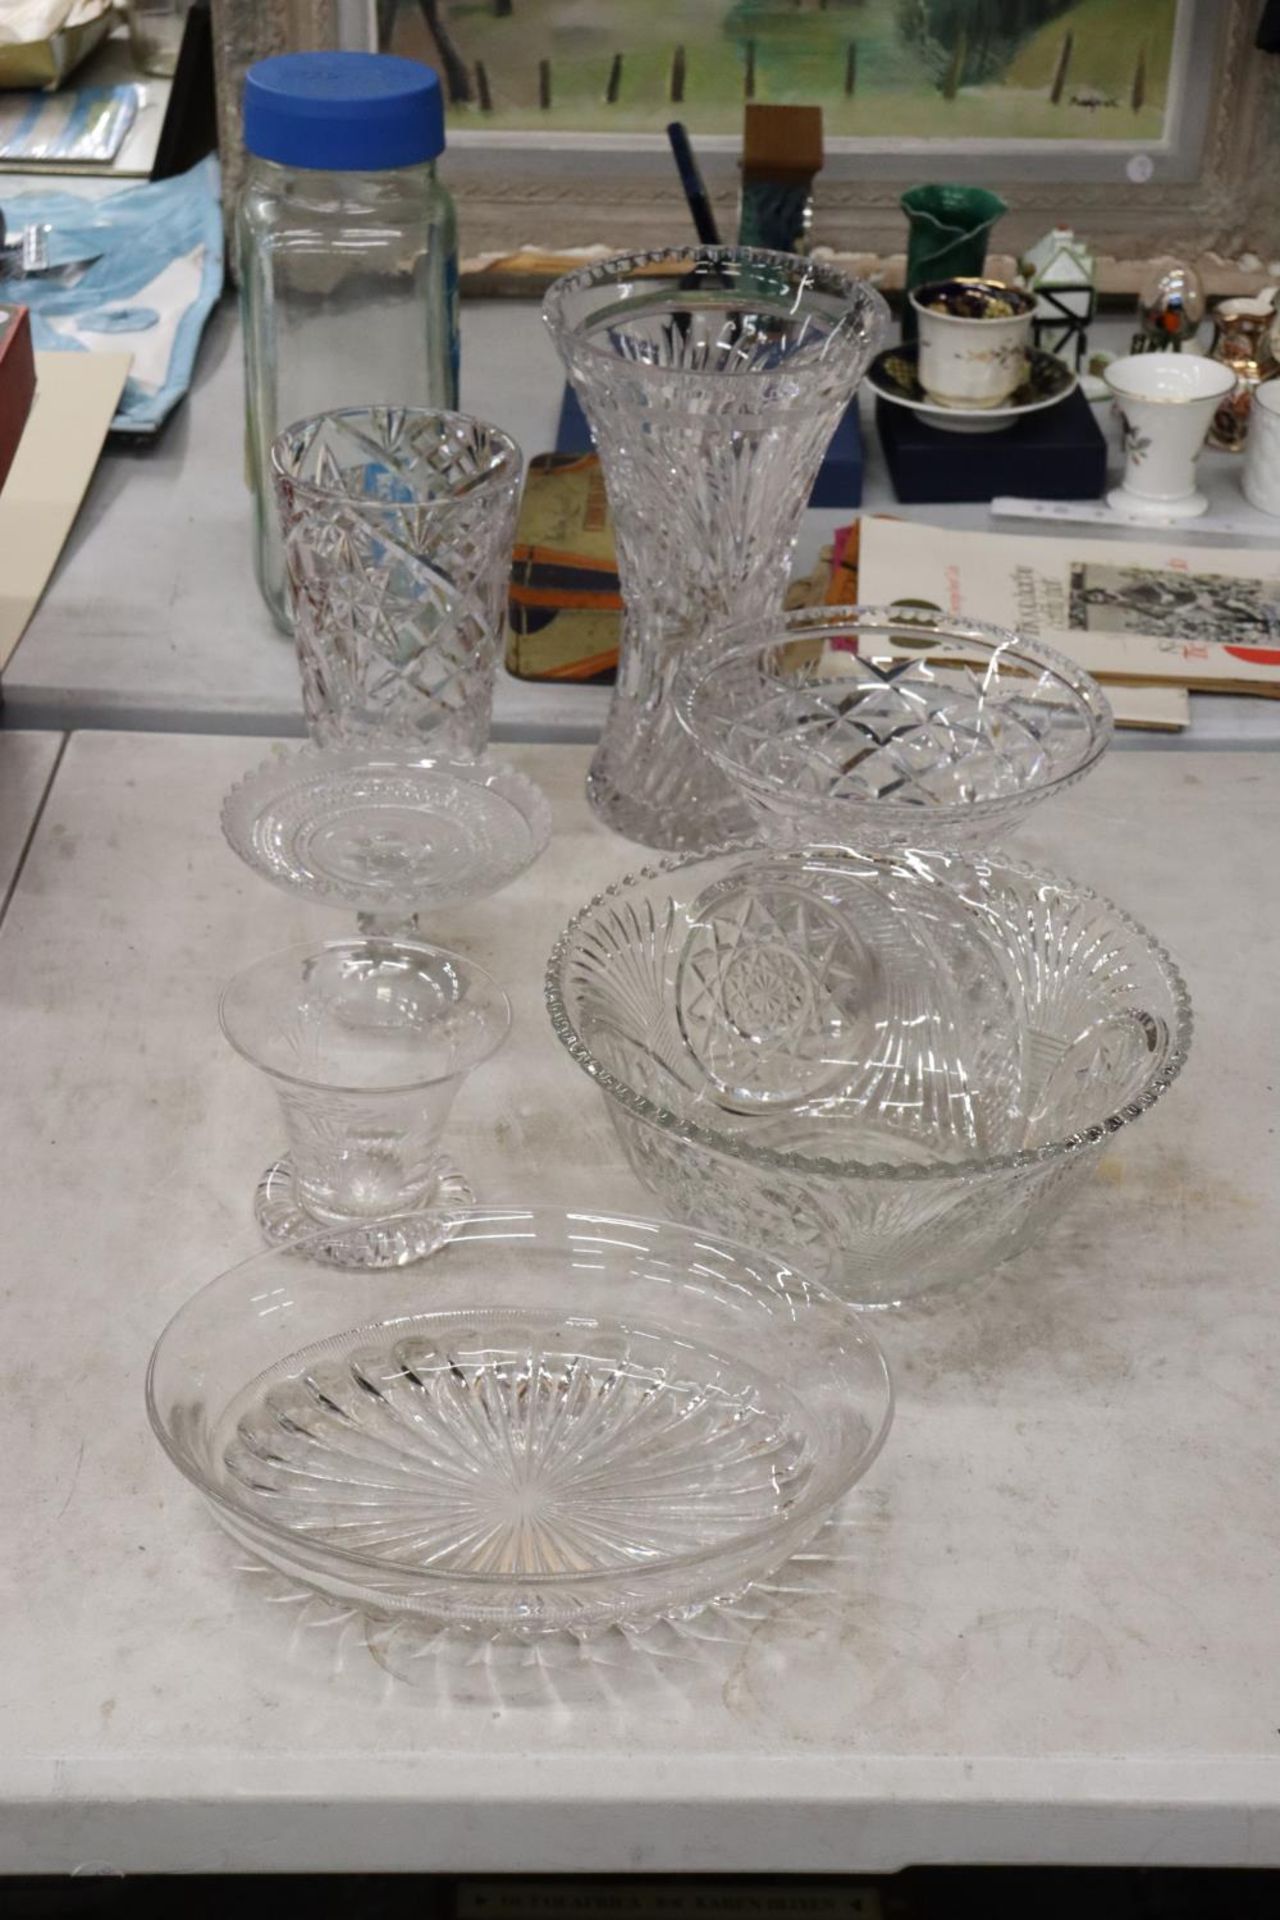 A QUANTITY OF GLASSWARE TO INCLUDE VASES, BOWLS, ETC - 7 PIECES IN TOTAL